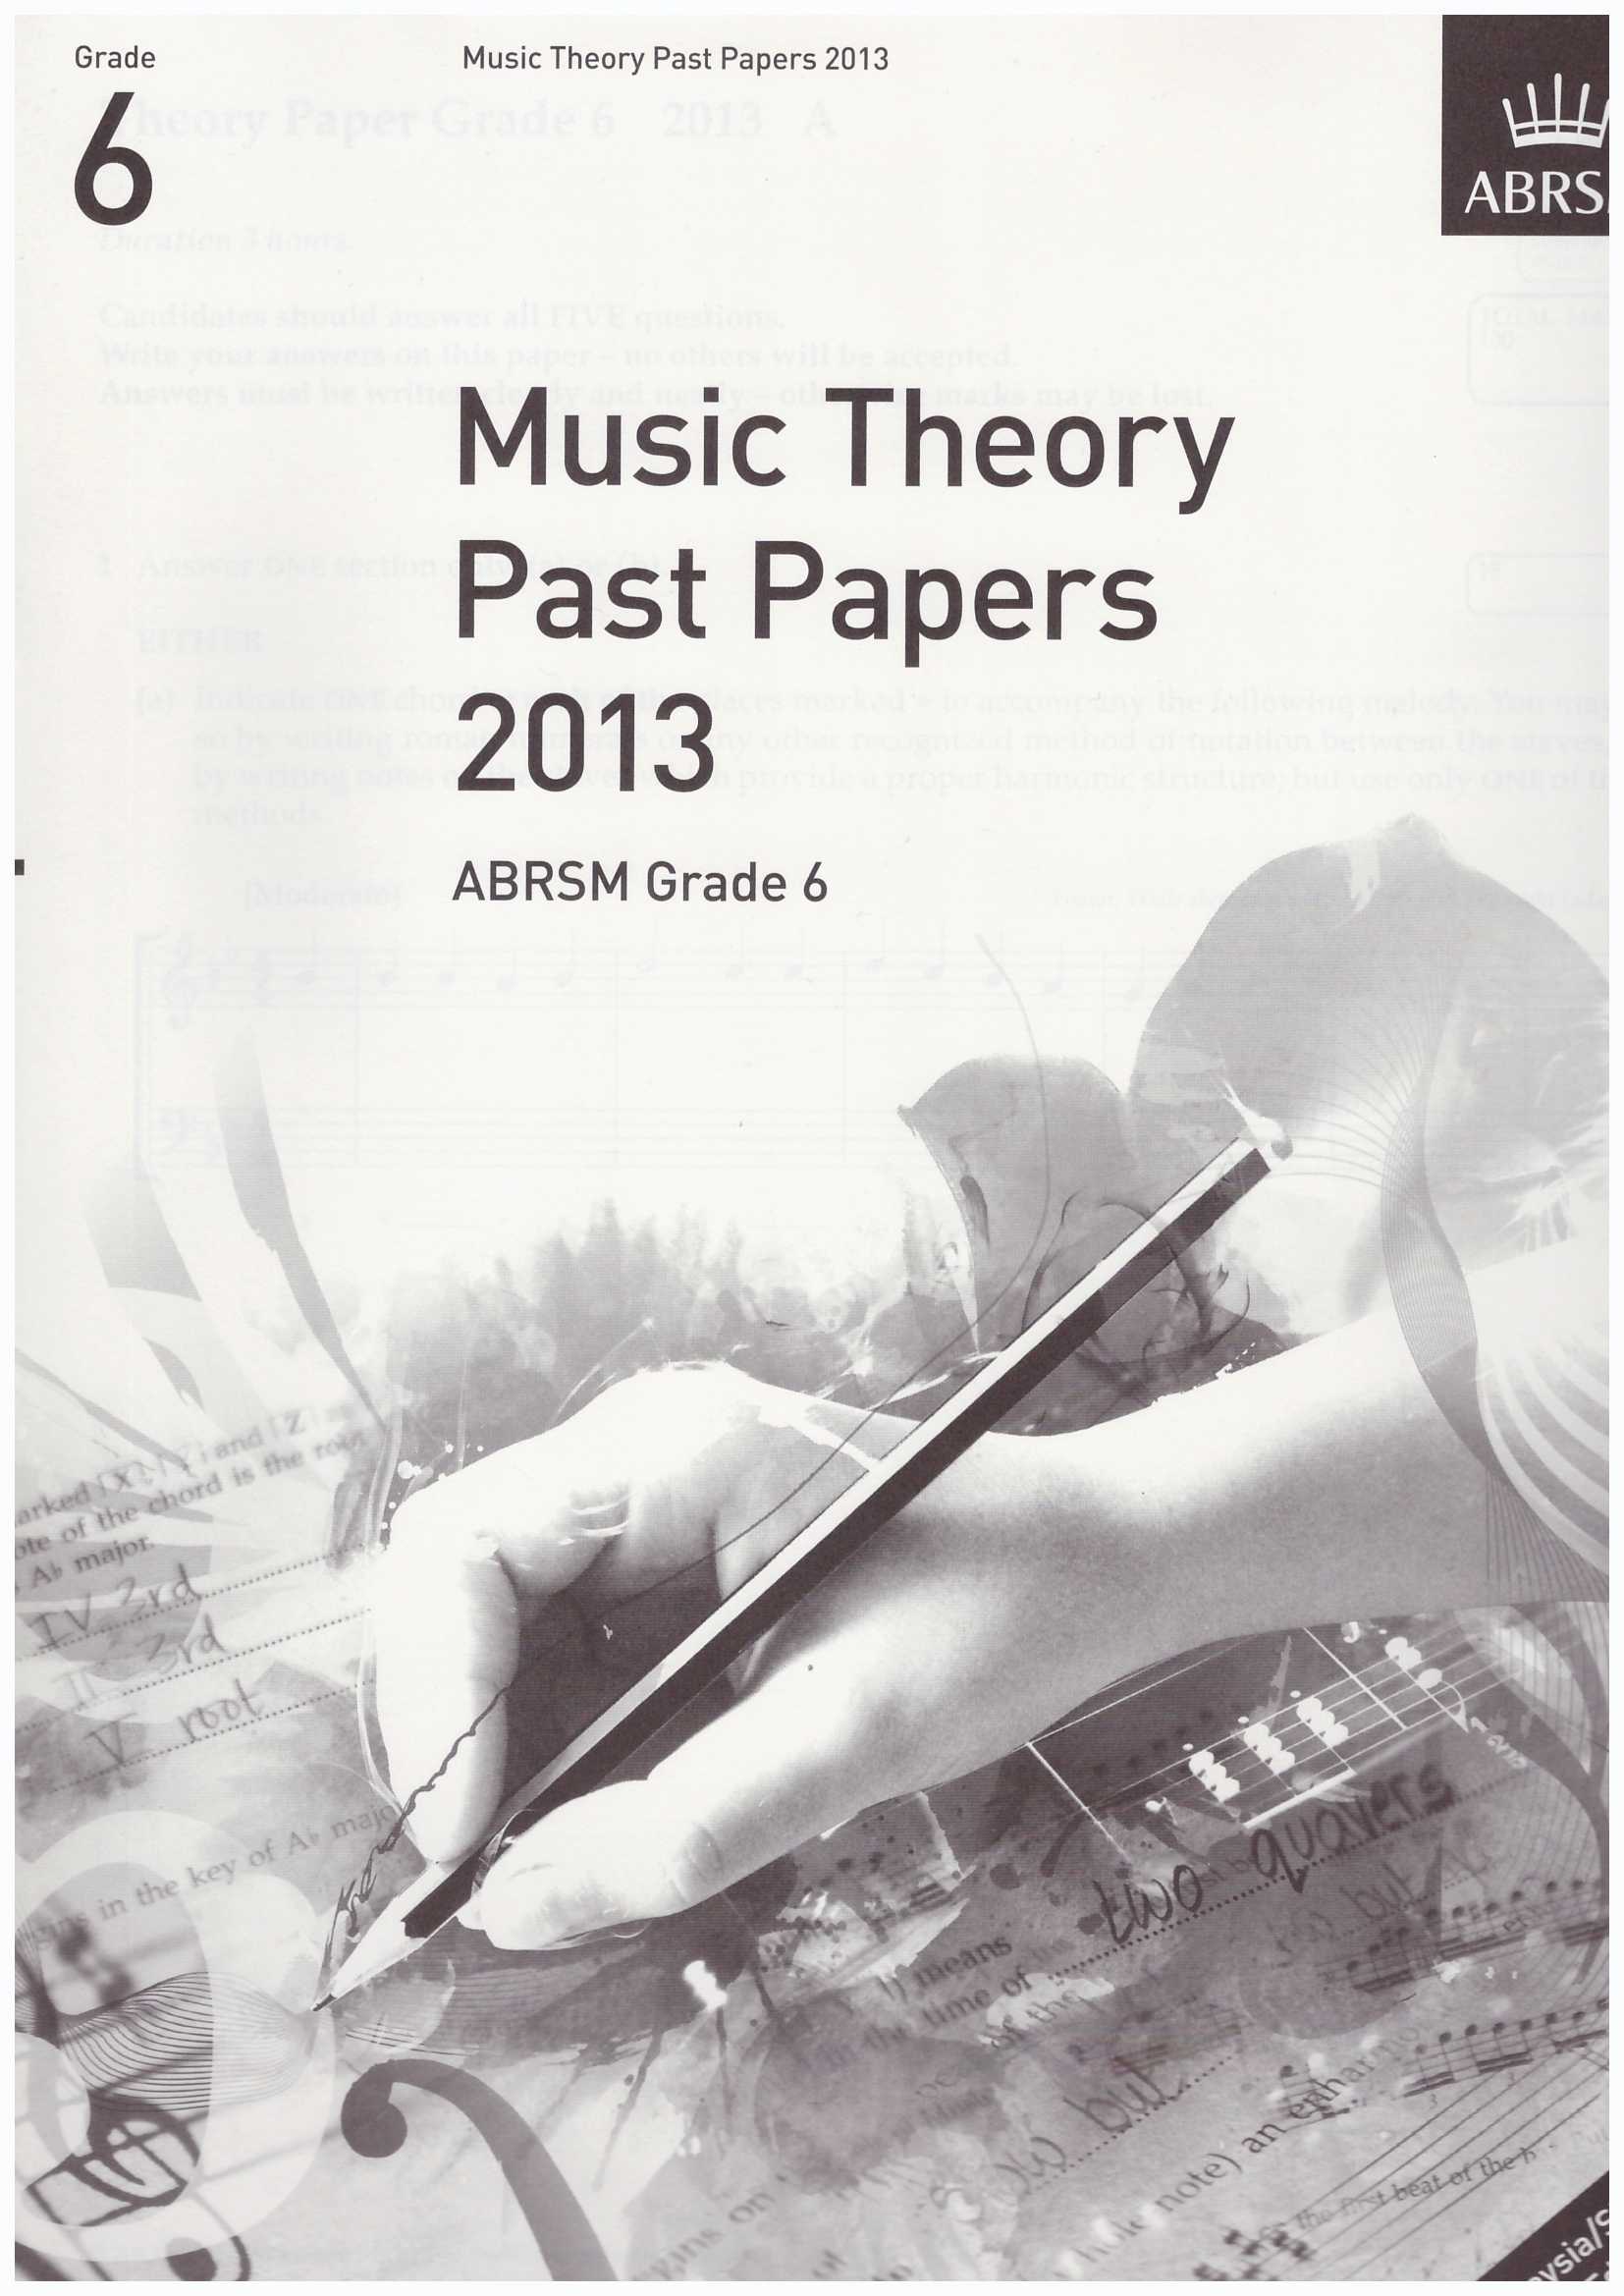 ABRSM Music Theory Practice Papers 2013 Grade 6 / Theory Paper / Theory Exam Paper / Theory Past Year Paper / Past Paper